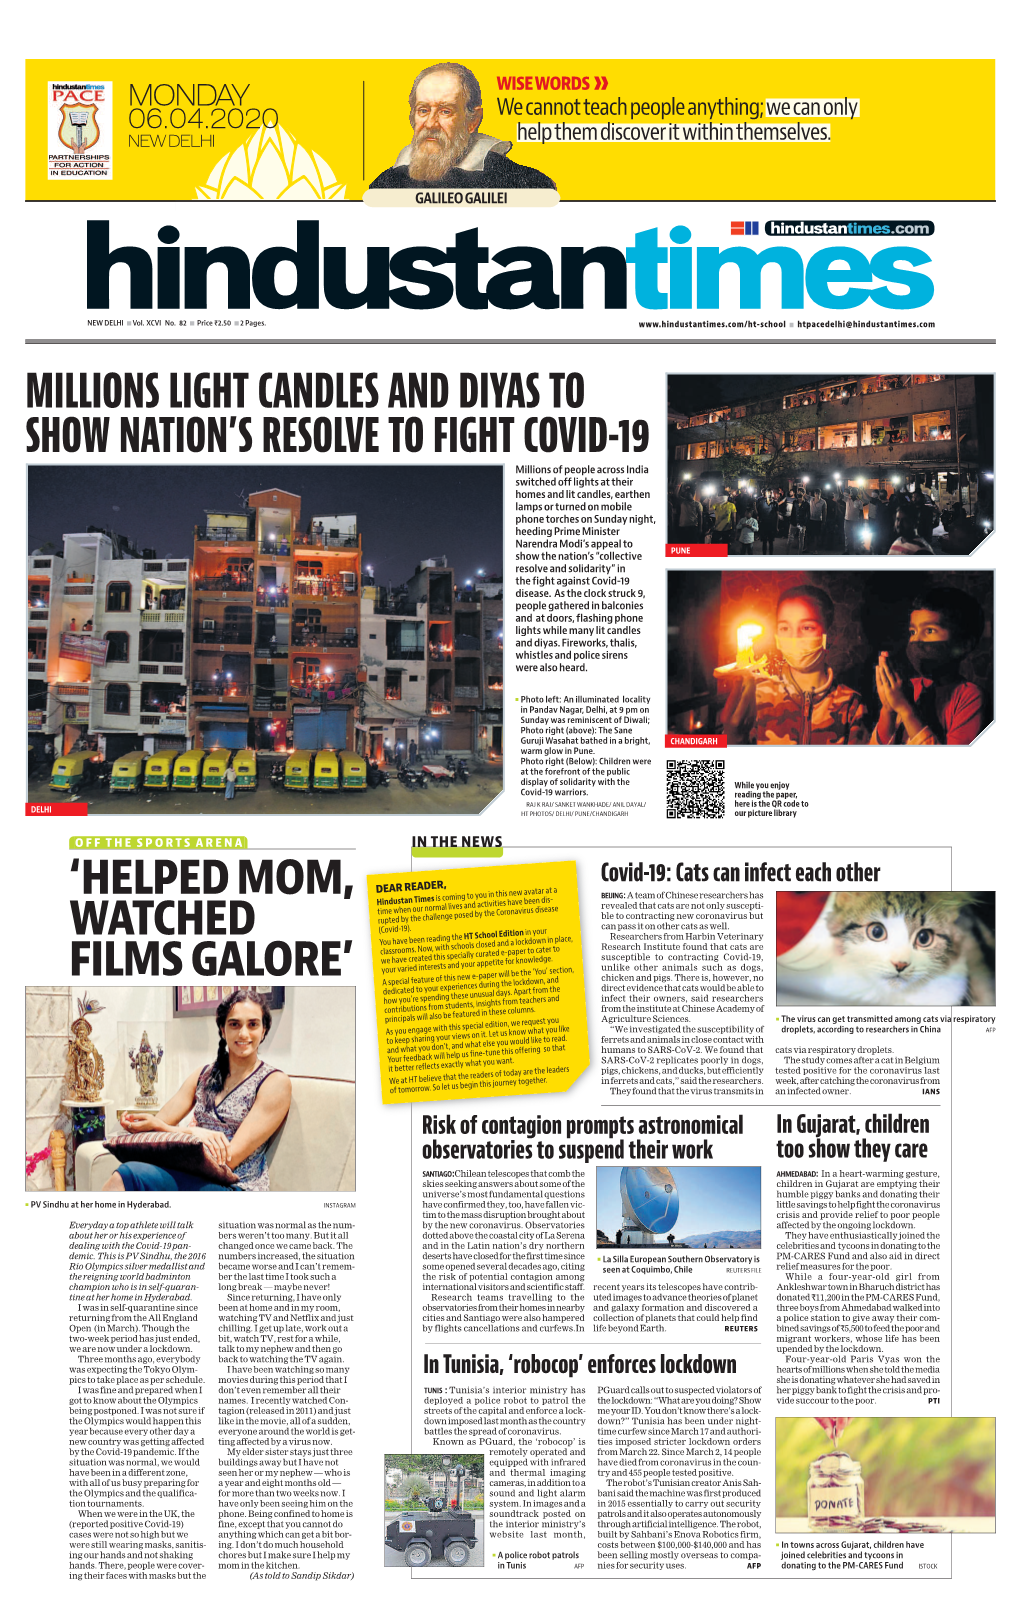 Millions Light Candles and Diyas to Show Nation's